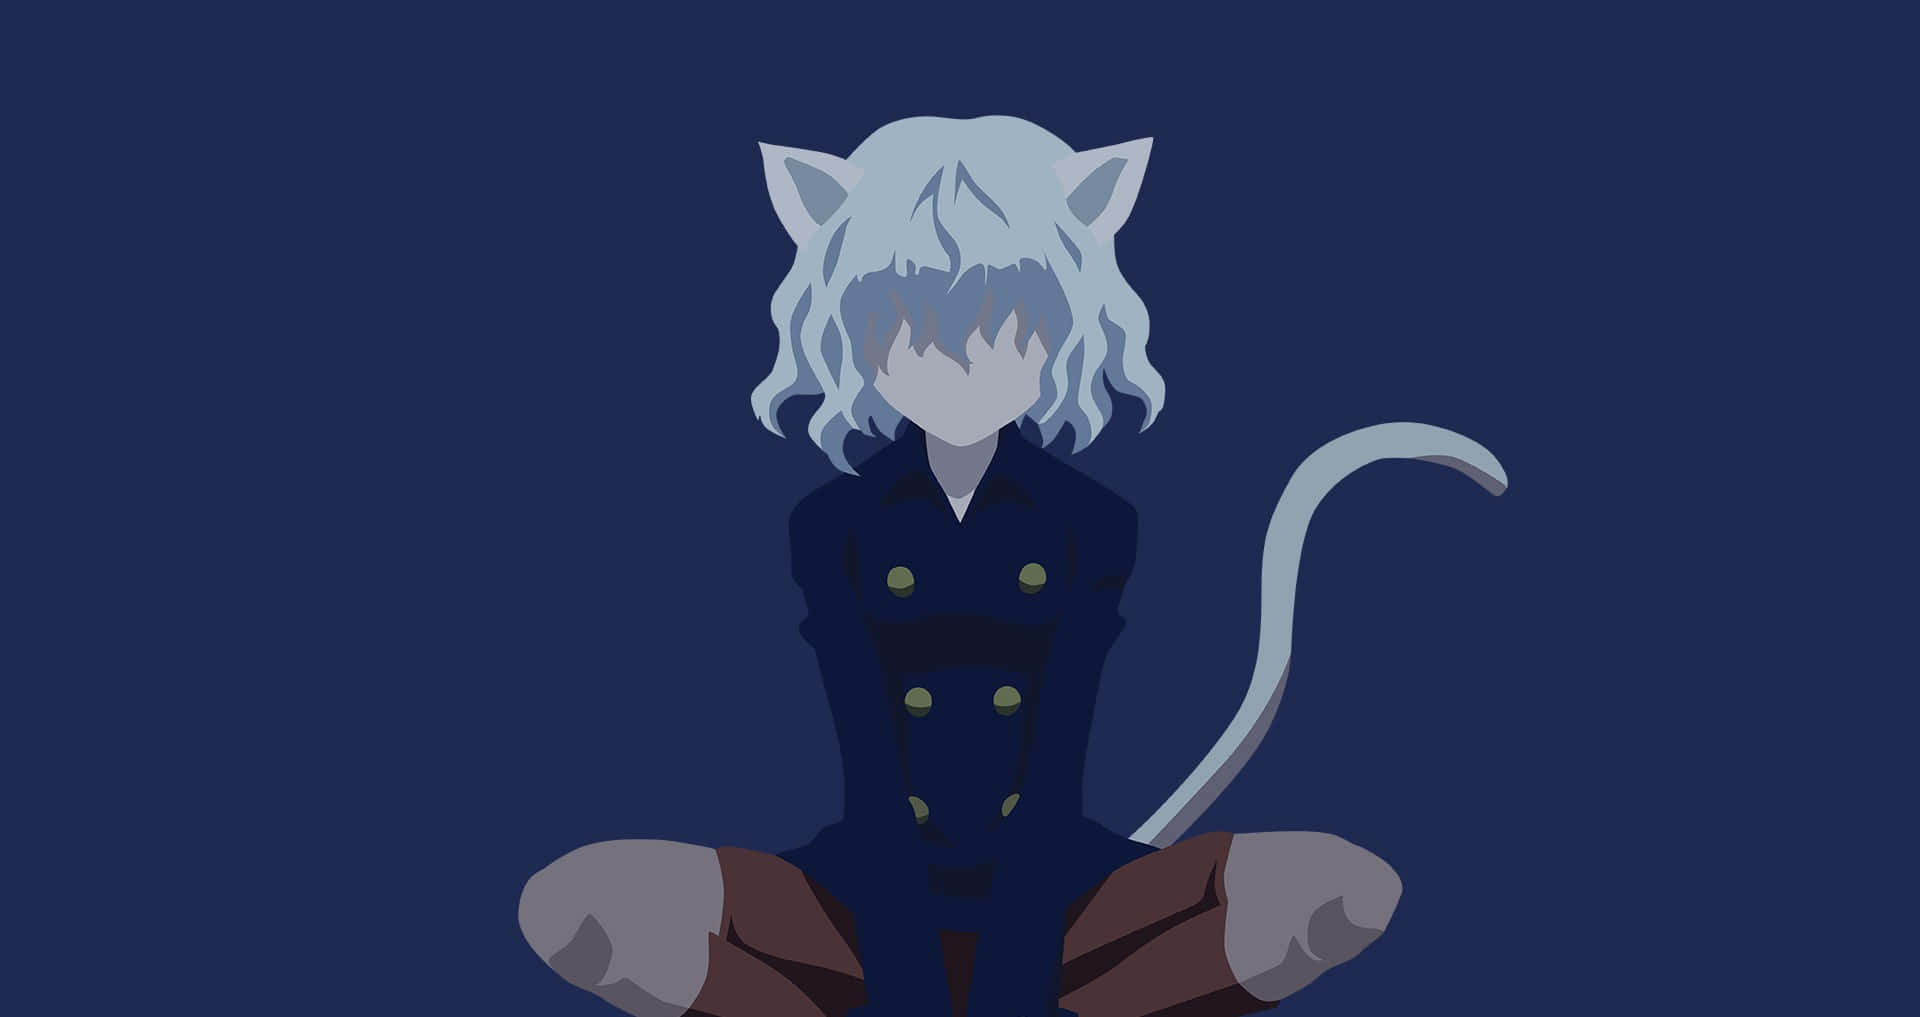 A Cat With White Hair Sitting On The Ground Wallpaper